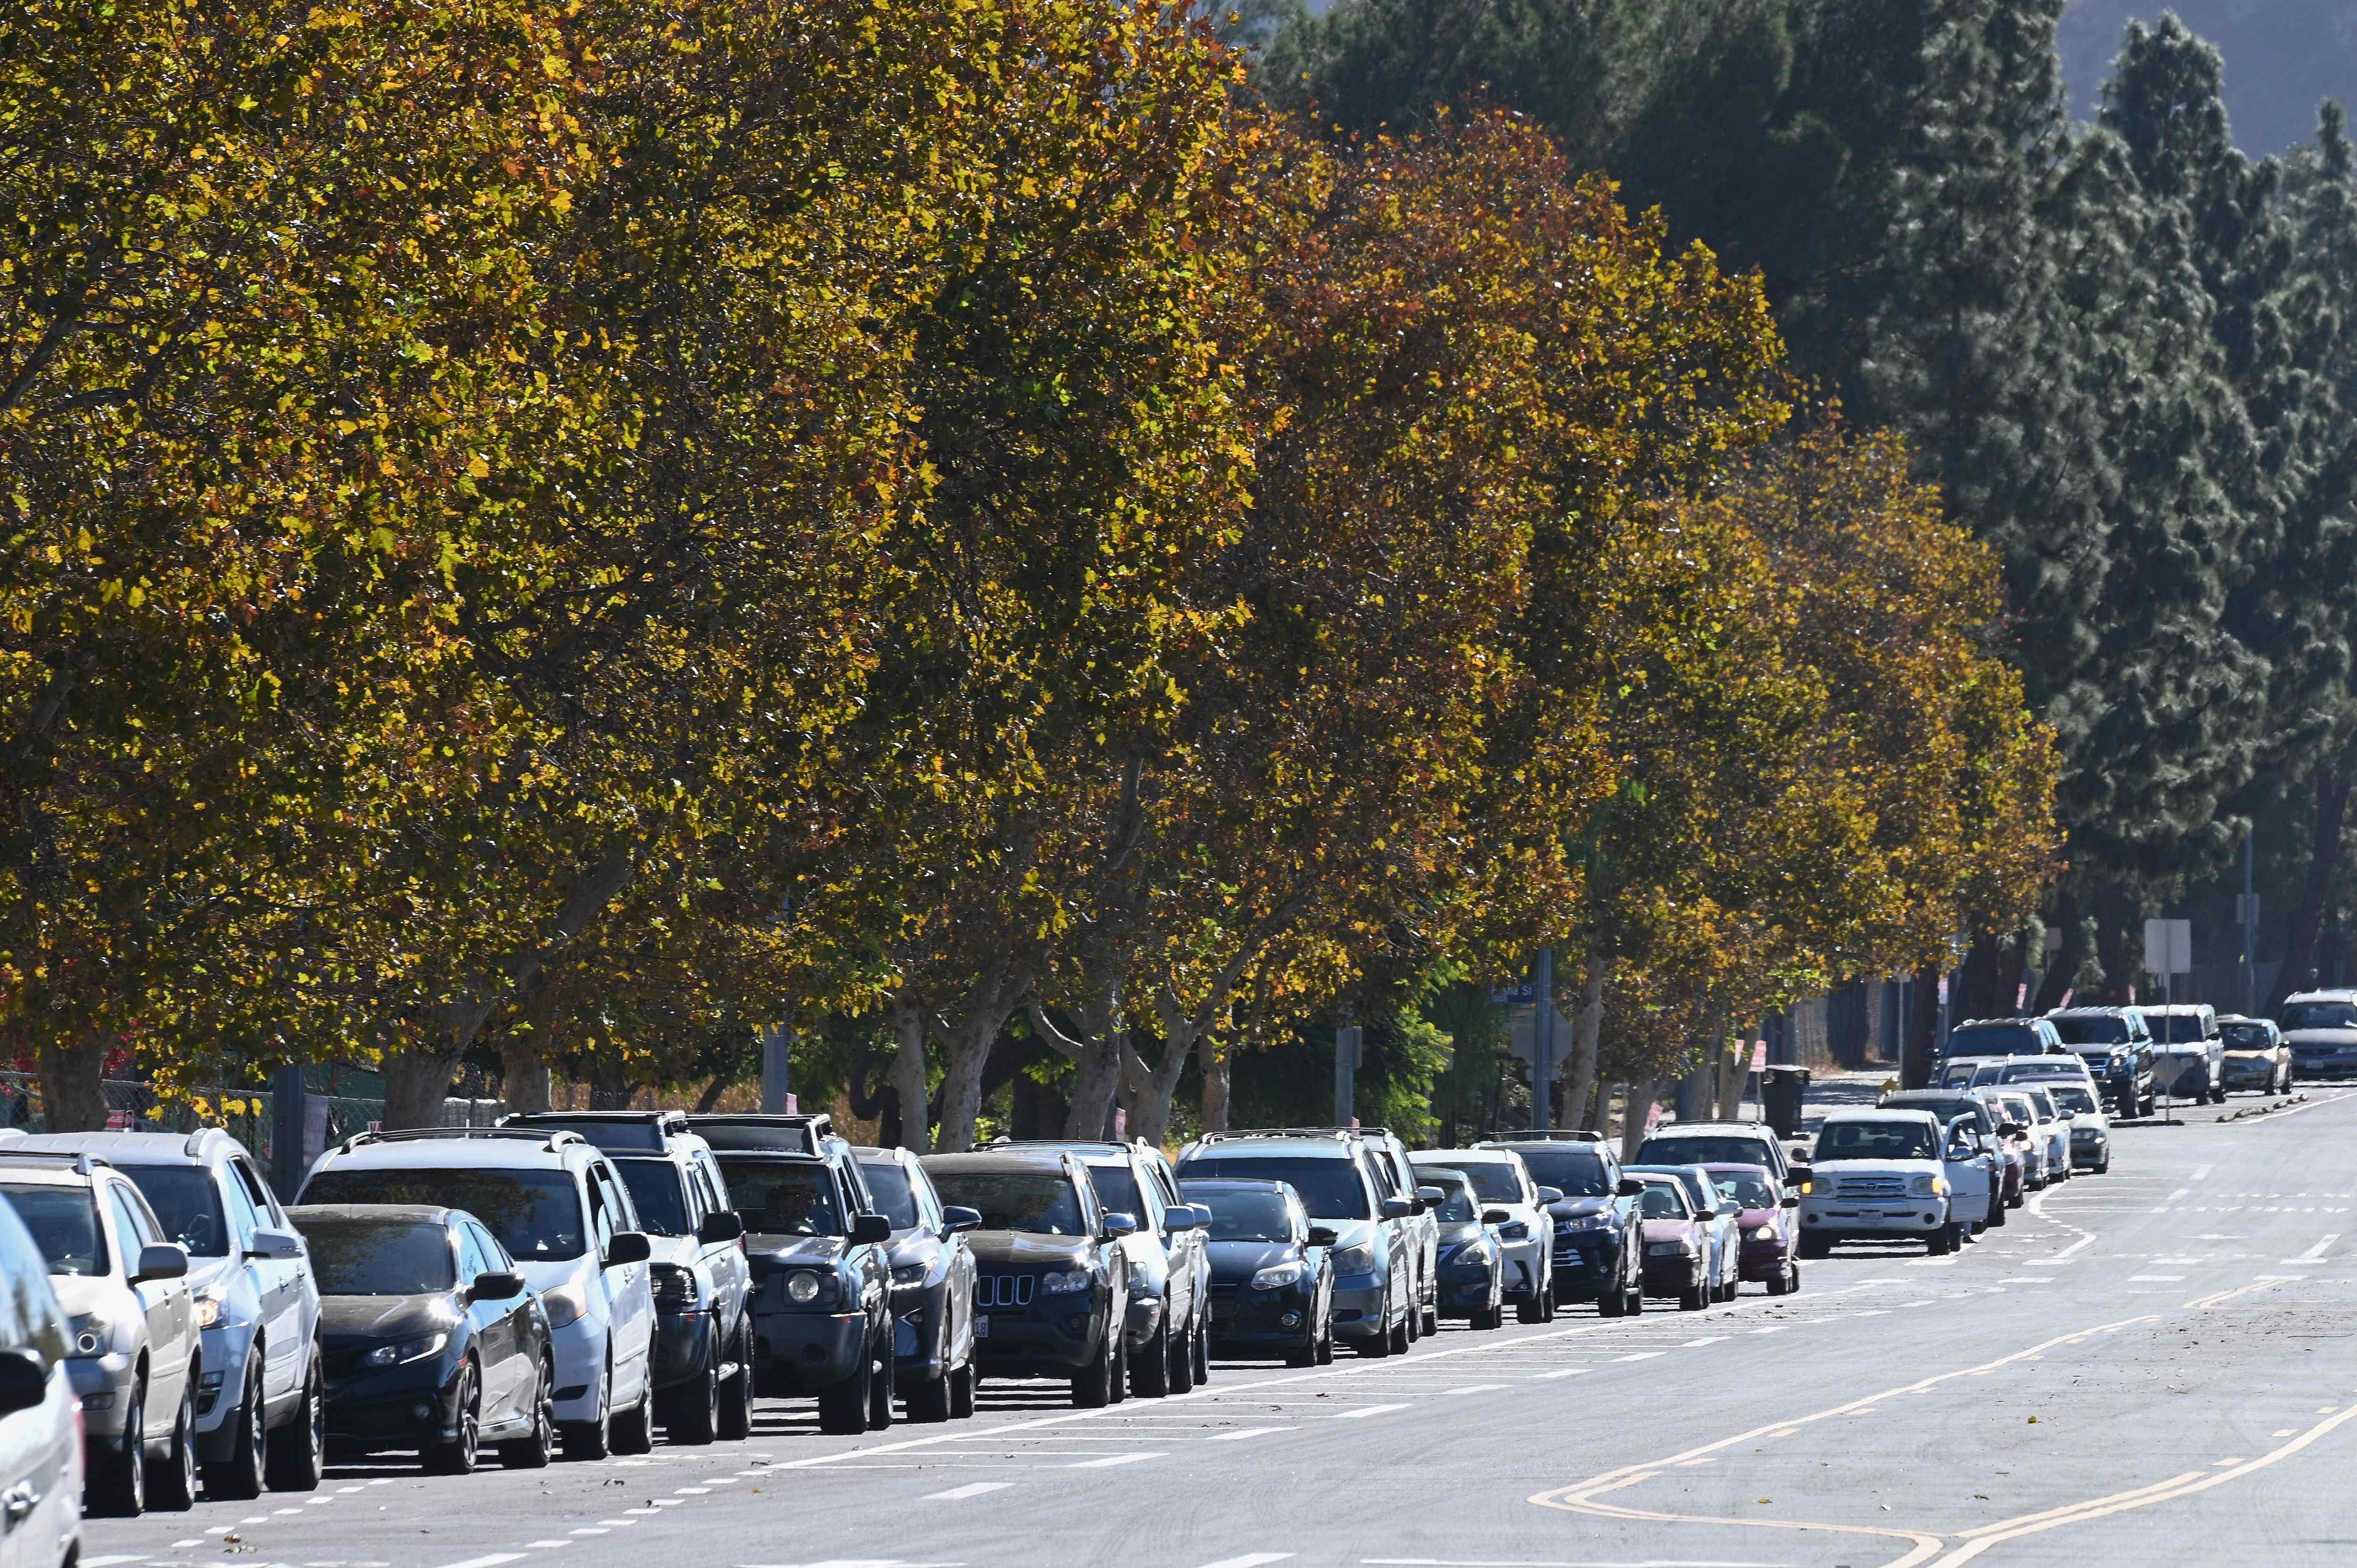 Cars wait in line to receive free groceries for people experiencing food insecurity due to the coronavirus pandemic. Credit: AFP Photo